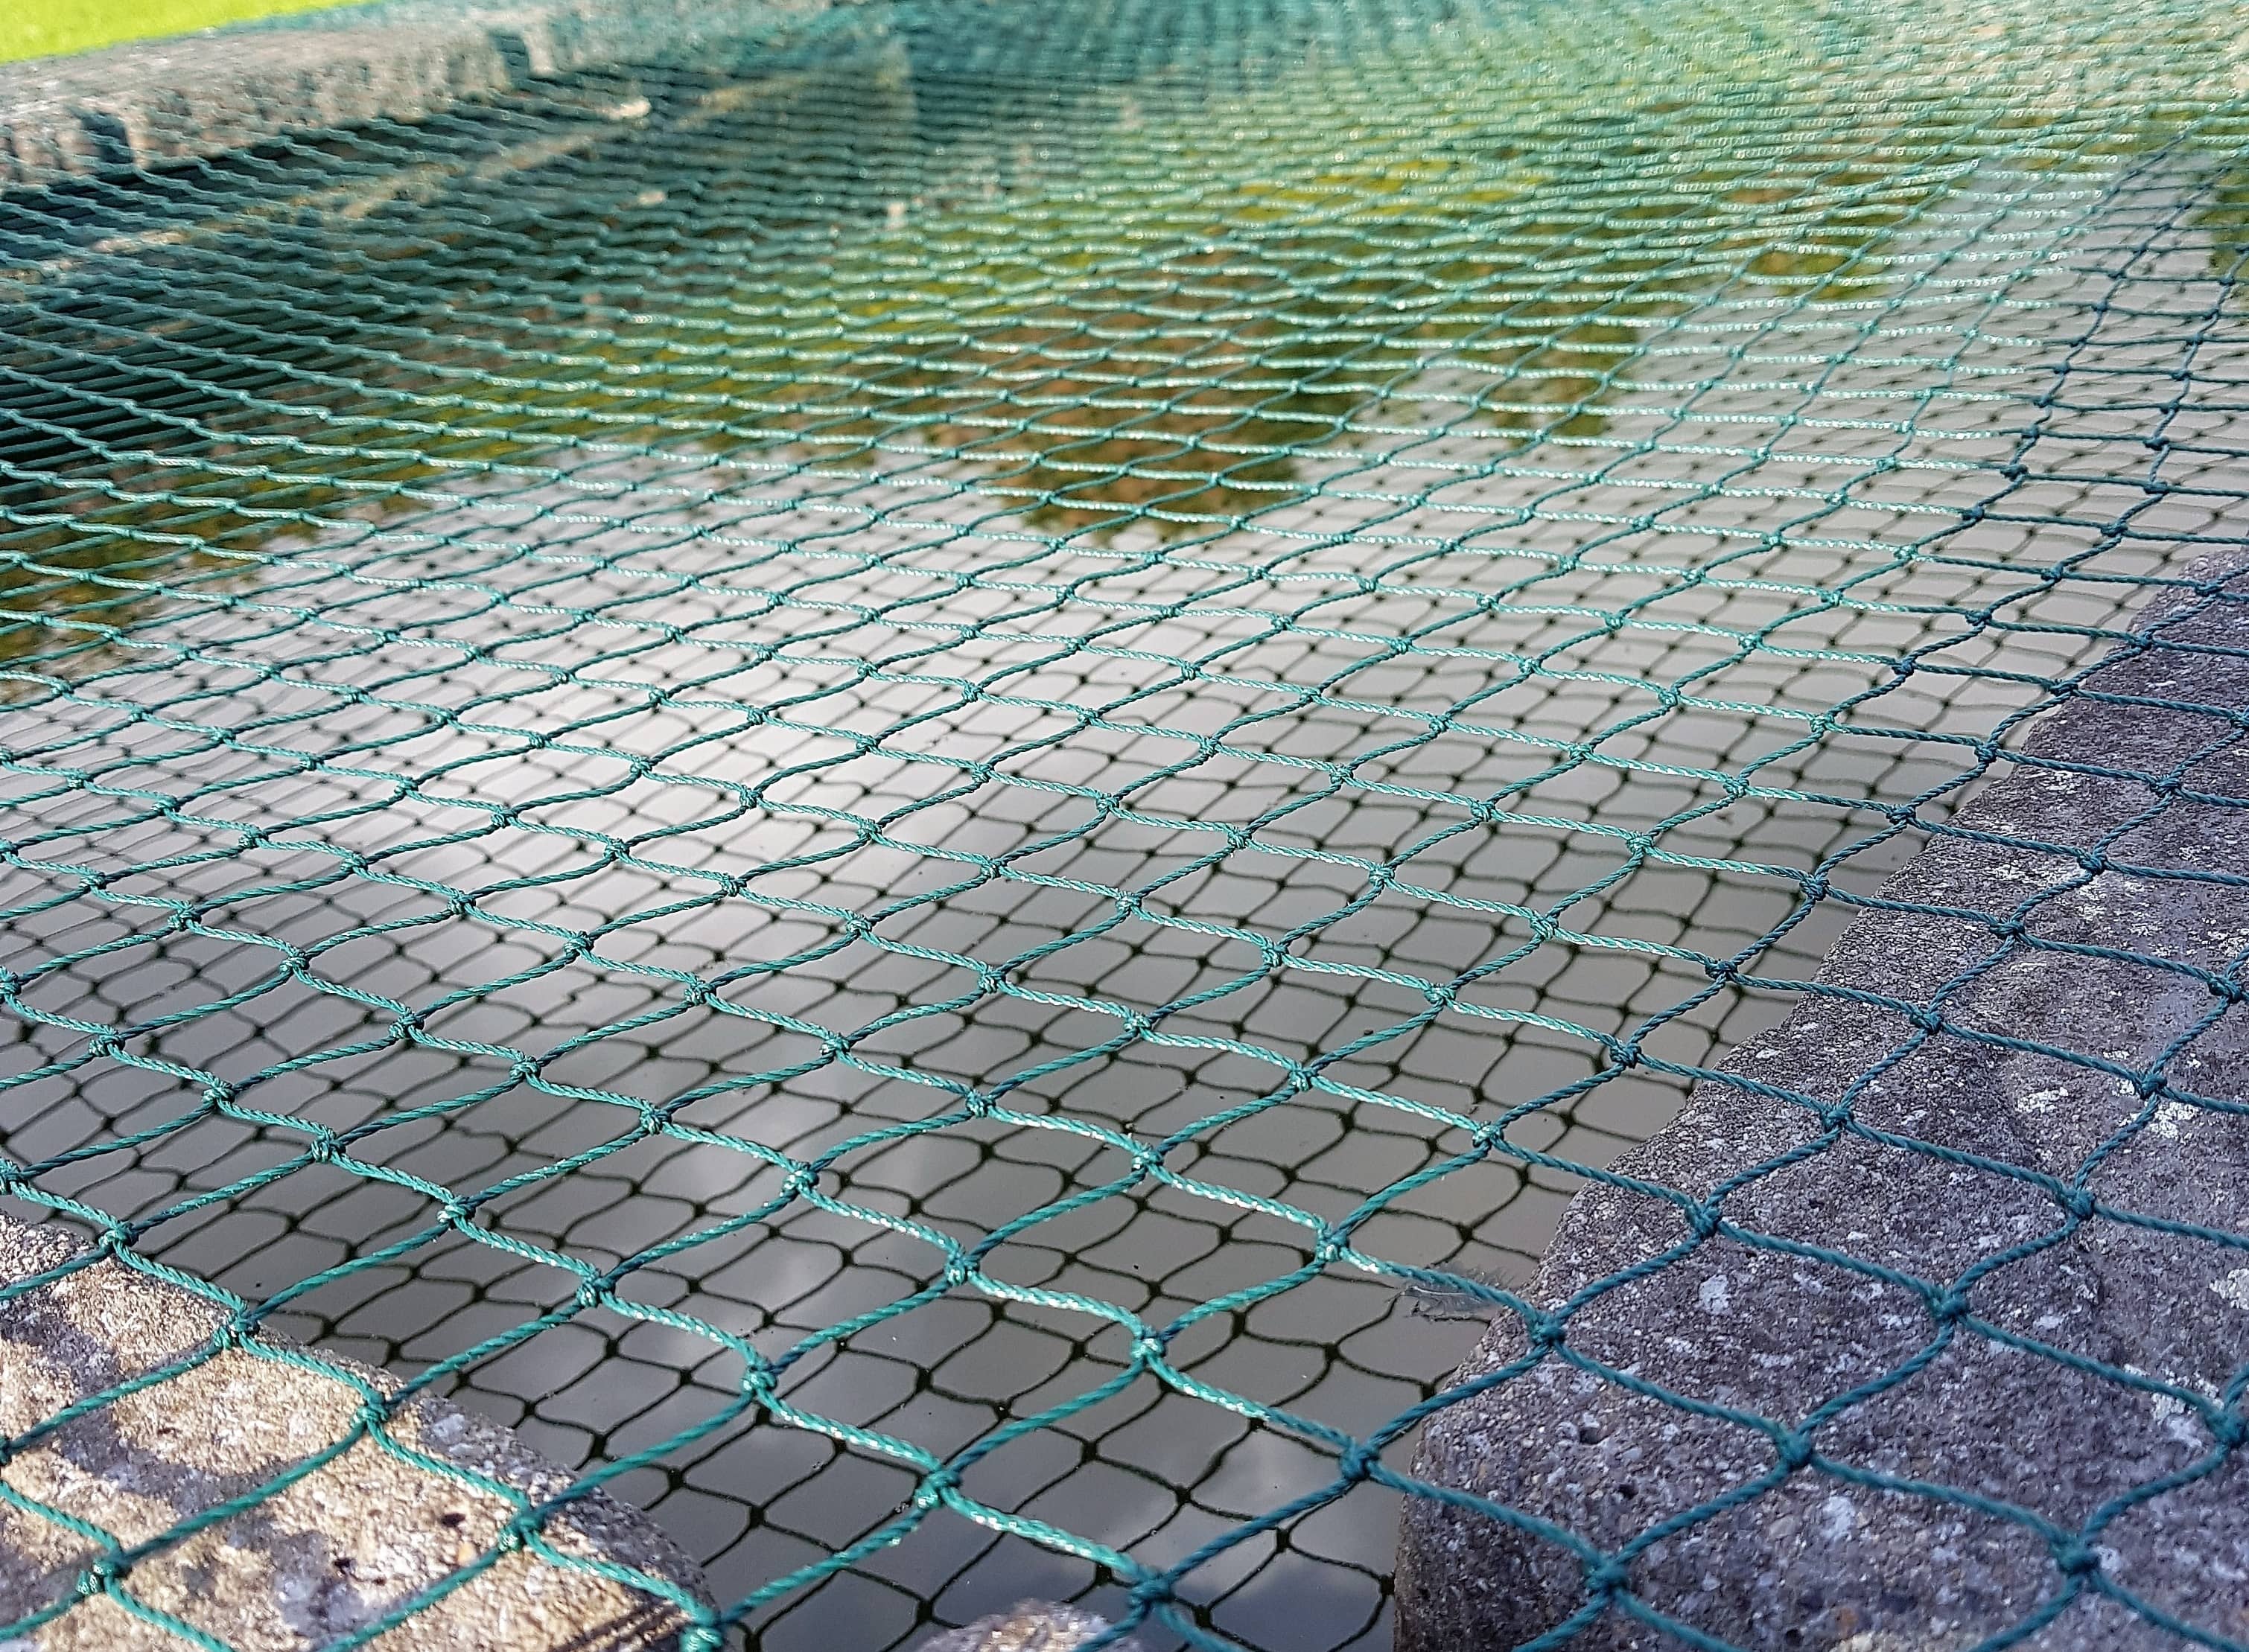 Pond covered in netting